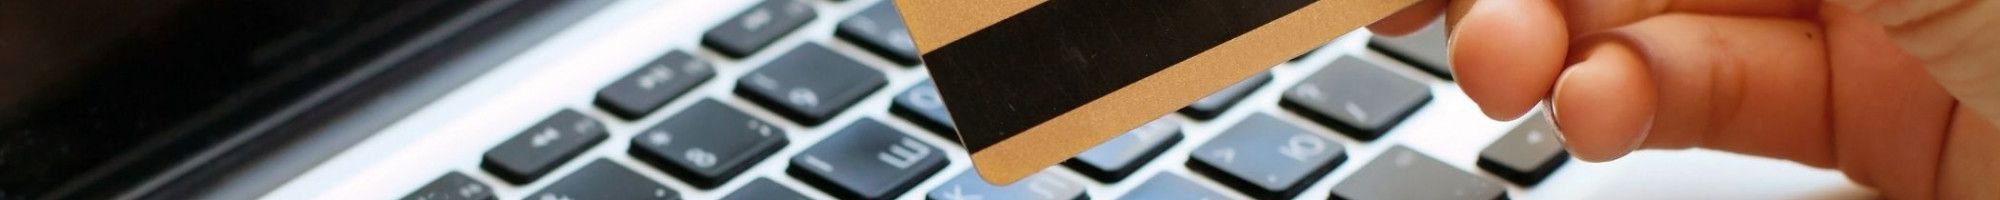 paying online using computer and credit card